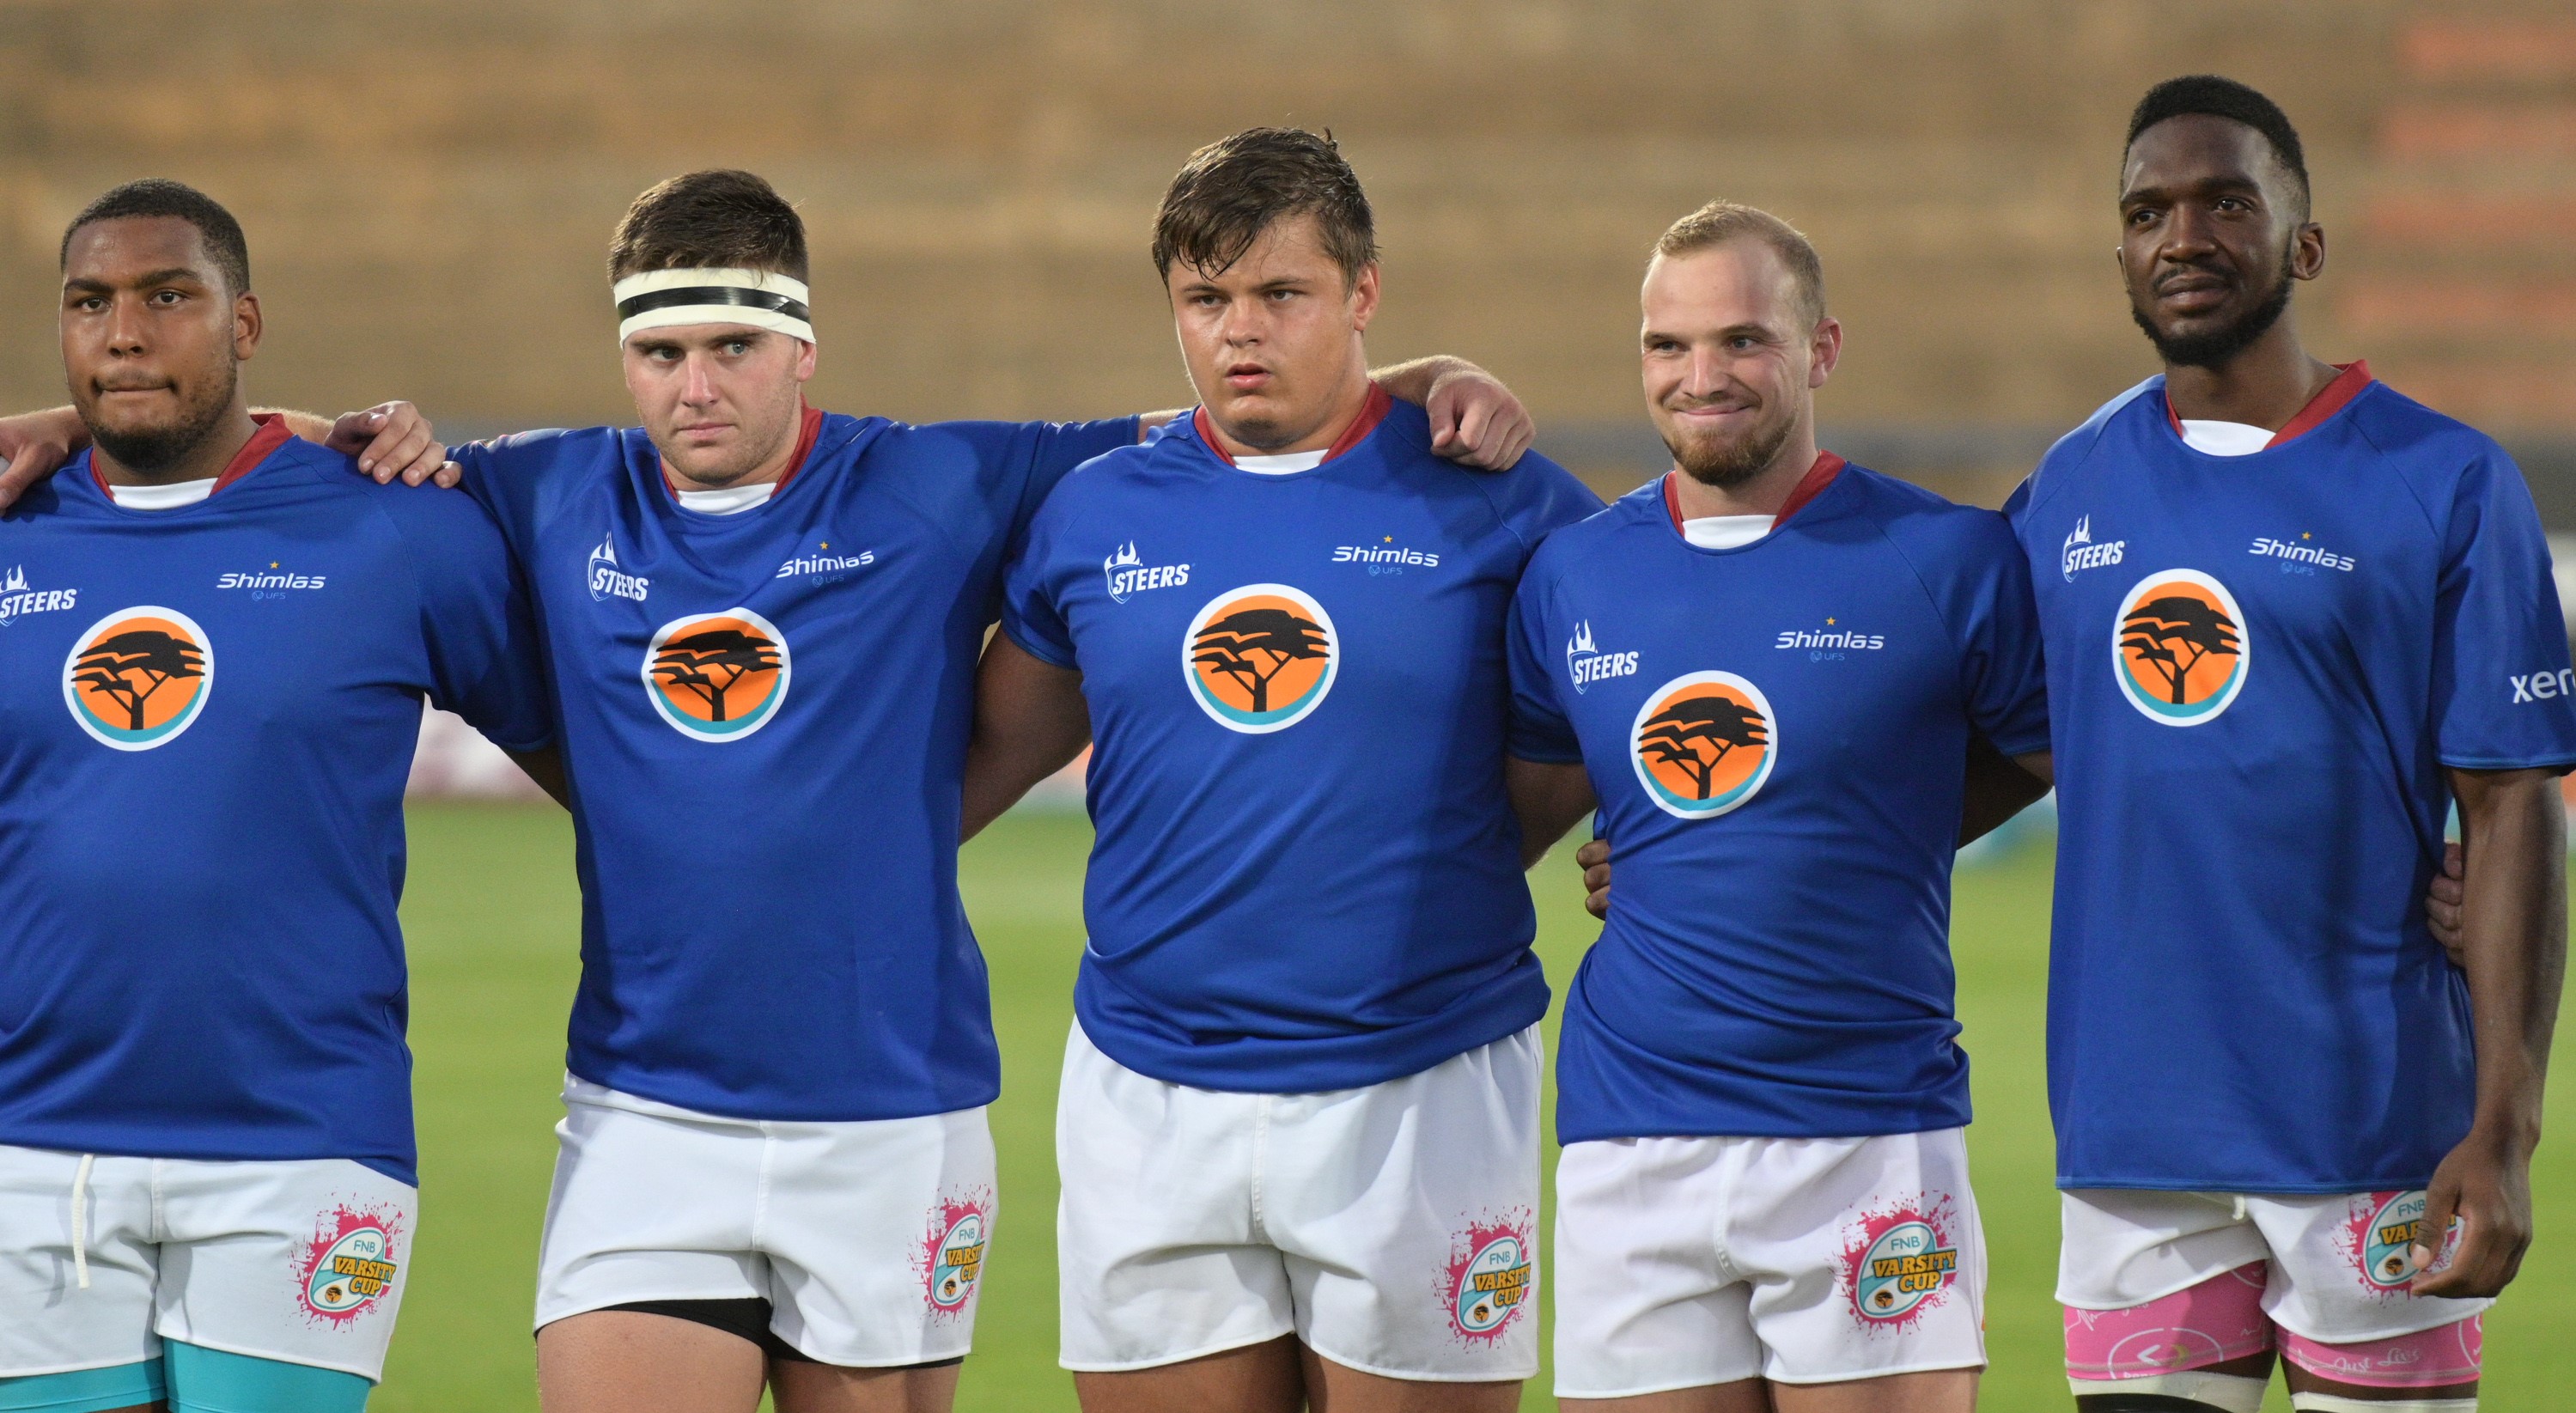 Singing of the anthem during the match between the FNB Shimlas and FNB Maties at Shimlapark in Bloemfontein. 21 February 2022